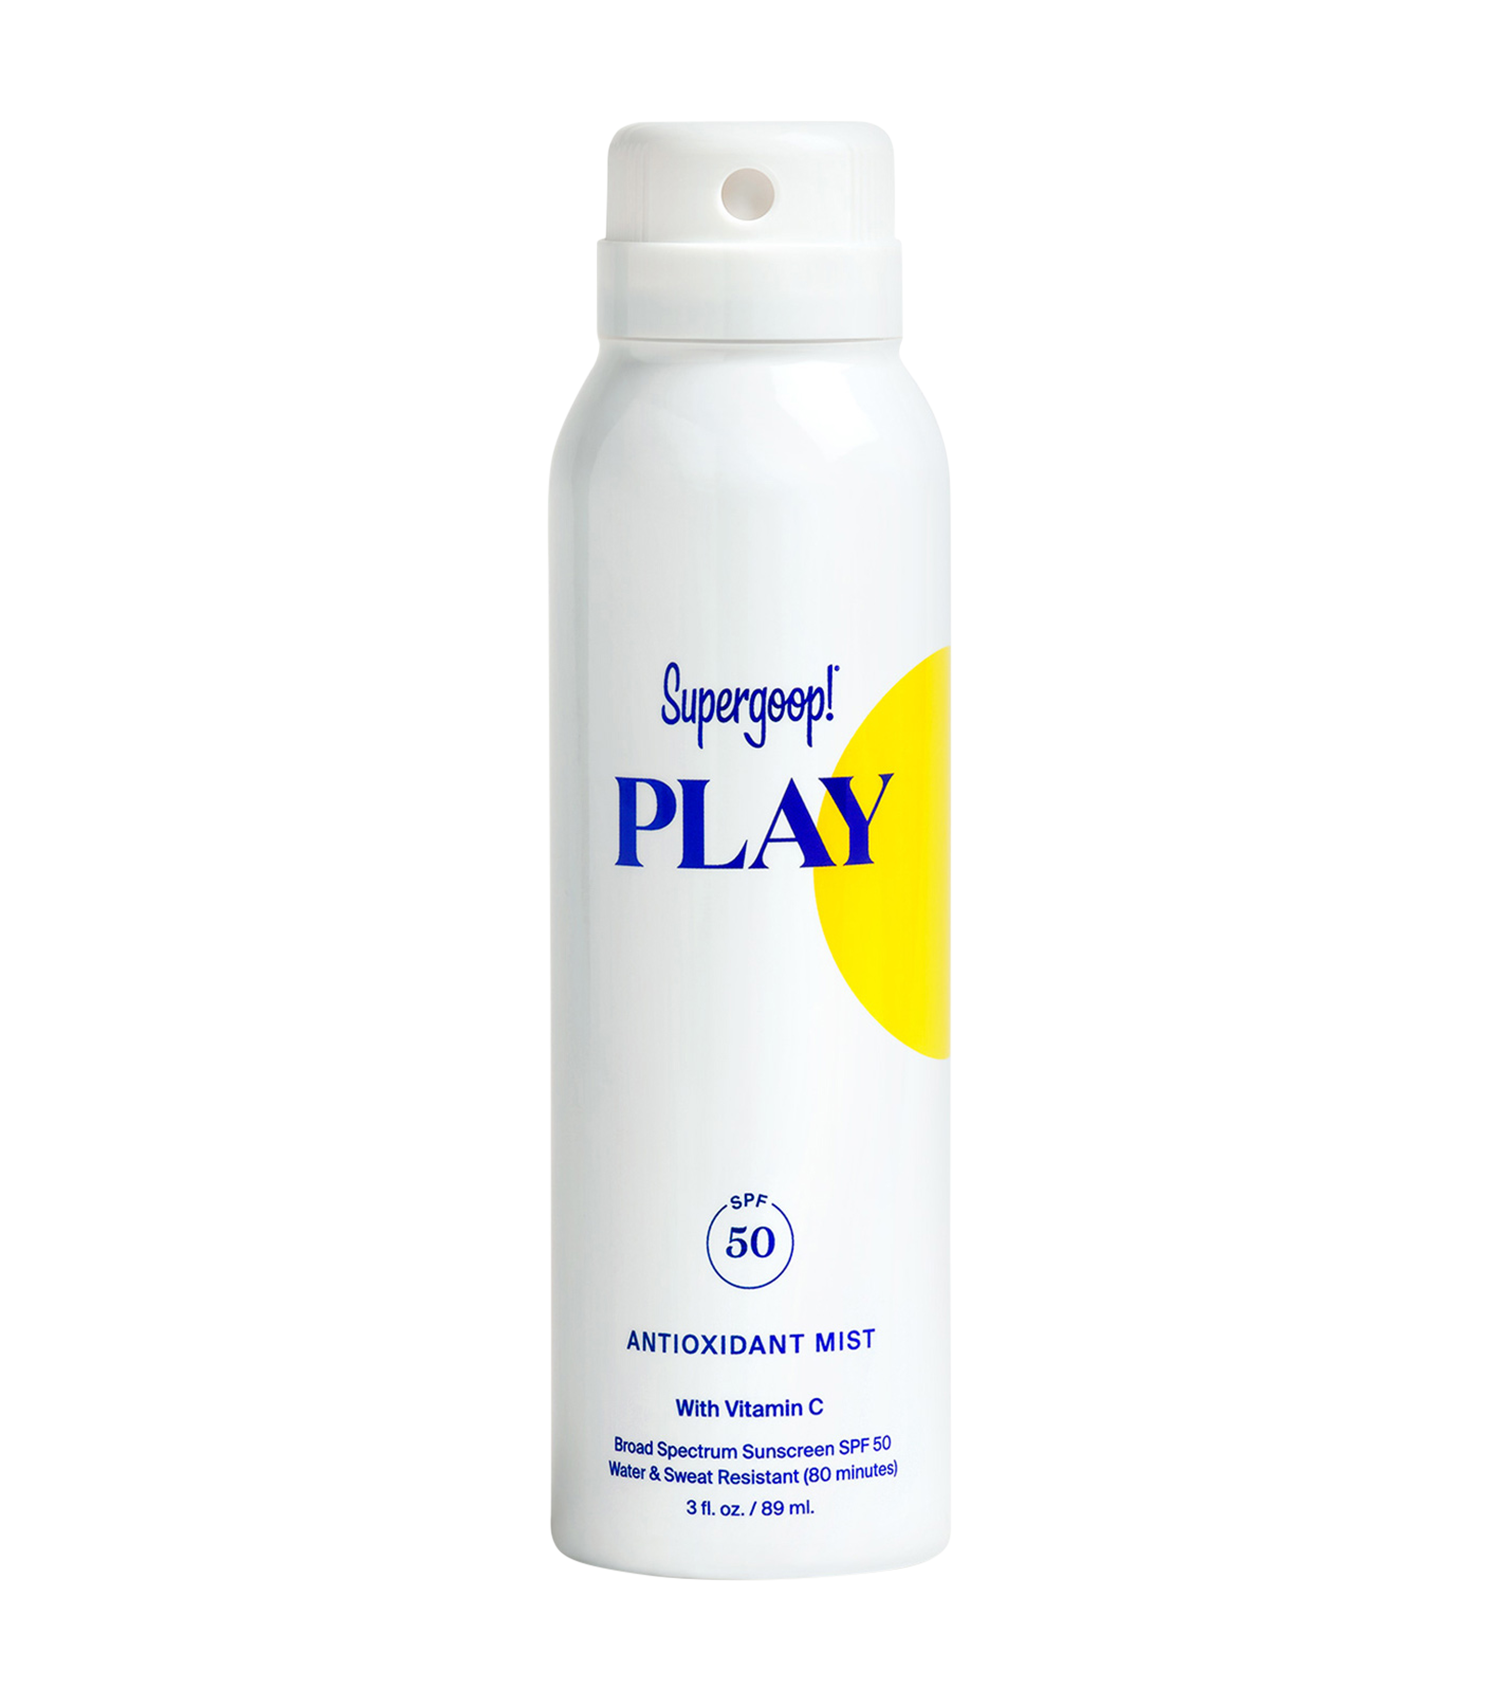 Supergoop! PLAY Antioxidant Body Mist SPF 50 with VItamin C Supergoop! PLAY Antioxidant Body Mist SPF 50 with VItamin C 1